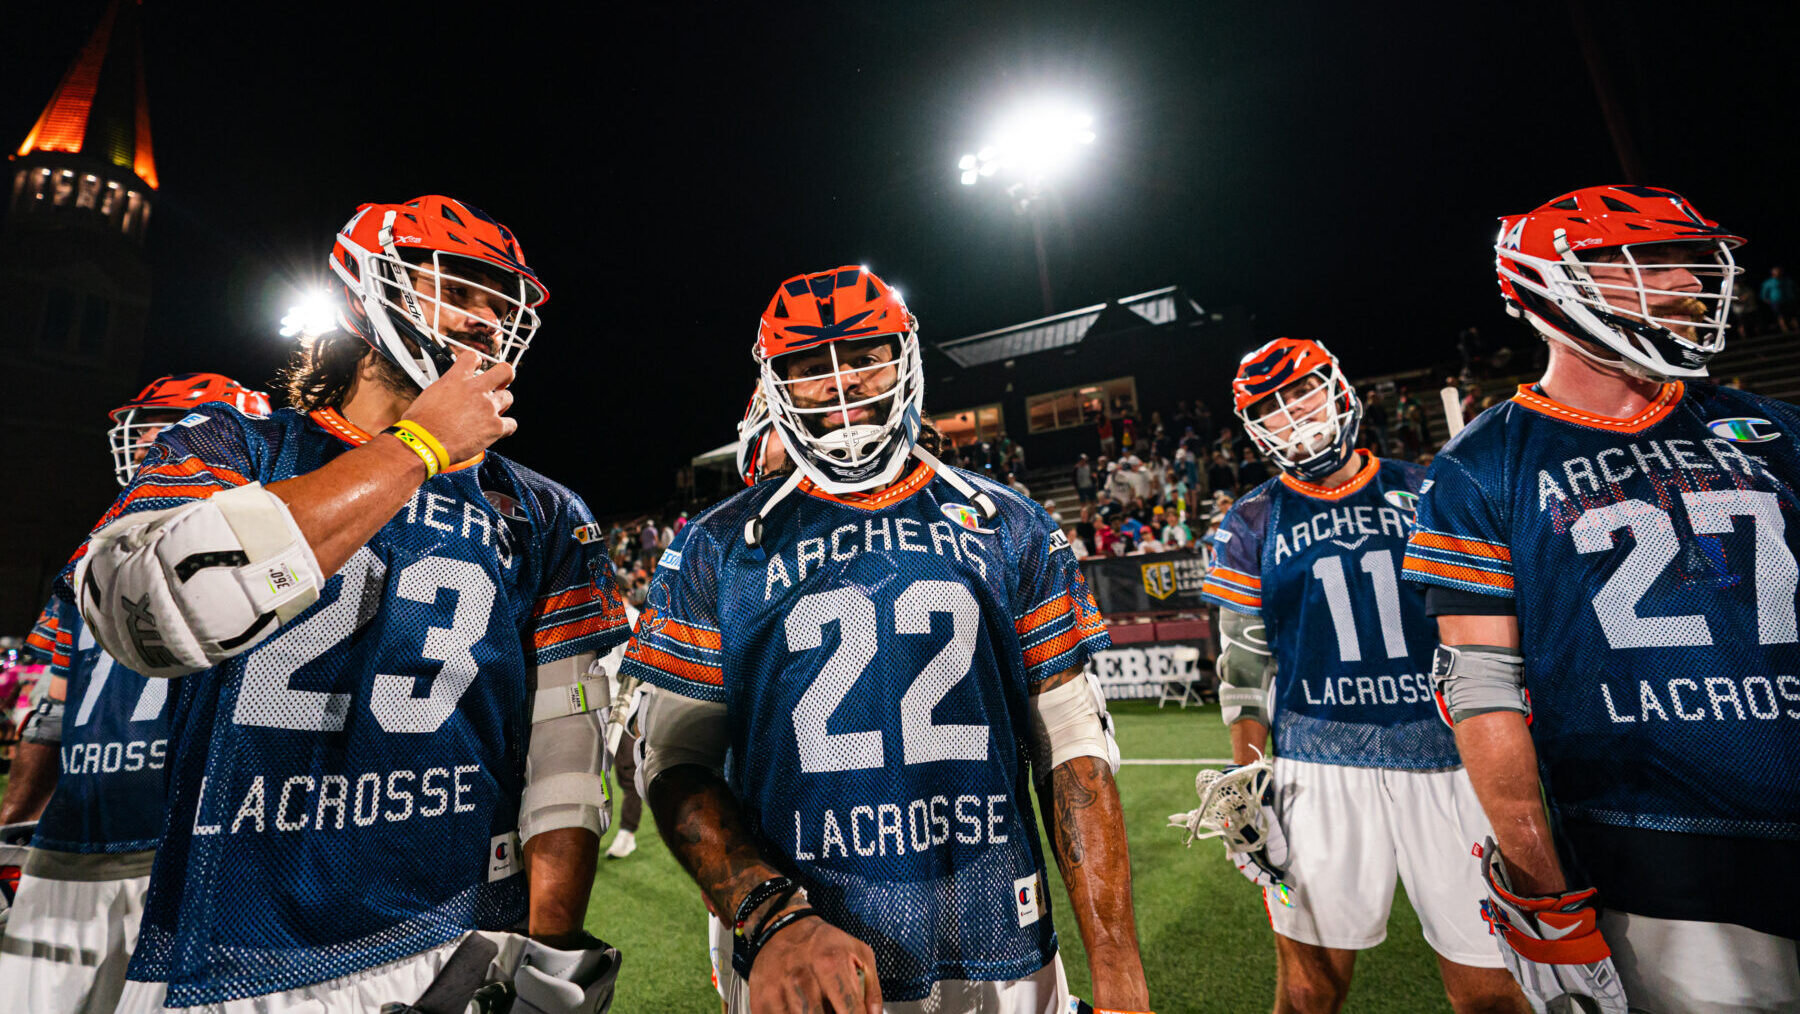 Atlas' Paul Rabil (99) carries the ball against the Archers during the  Premier Lacrosse League game on Saturday, Sept. 21, 2019, in Chester, Pa.  (Adam Hunger/AP Images for Premier Lacrosse League Stock